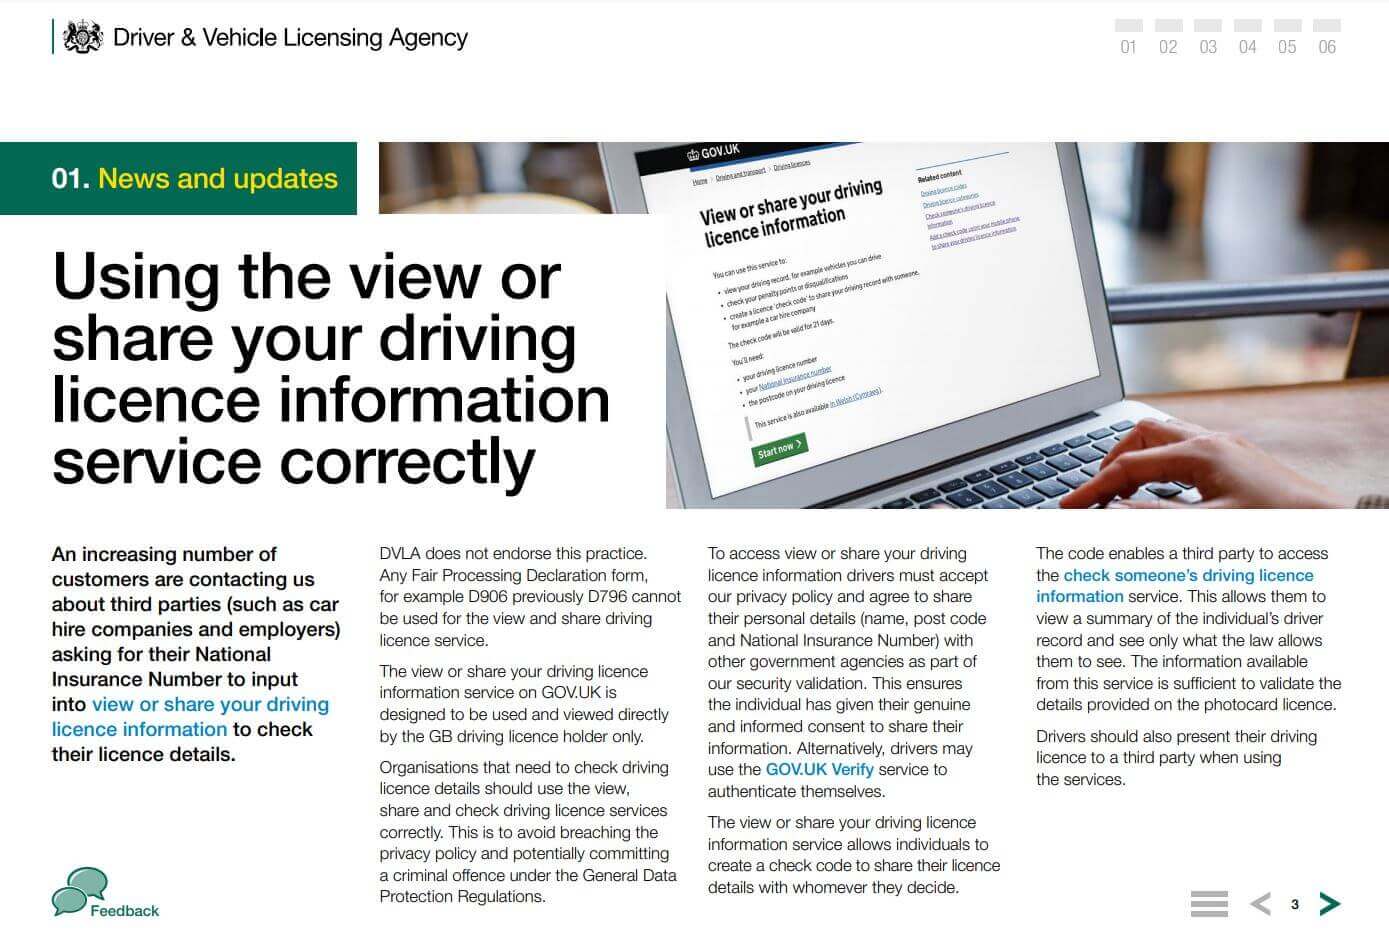 Correct Use of View or Share your driving licence information from the DVLA